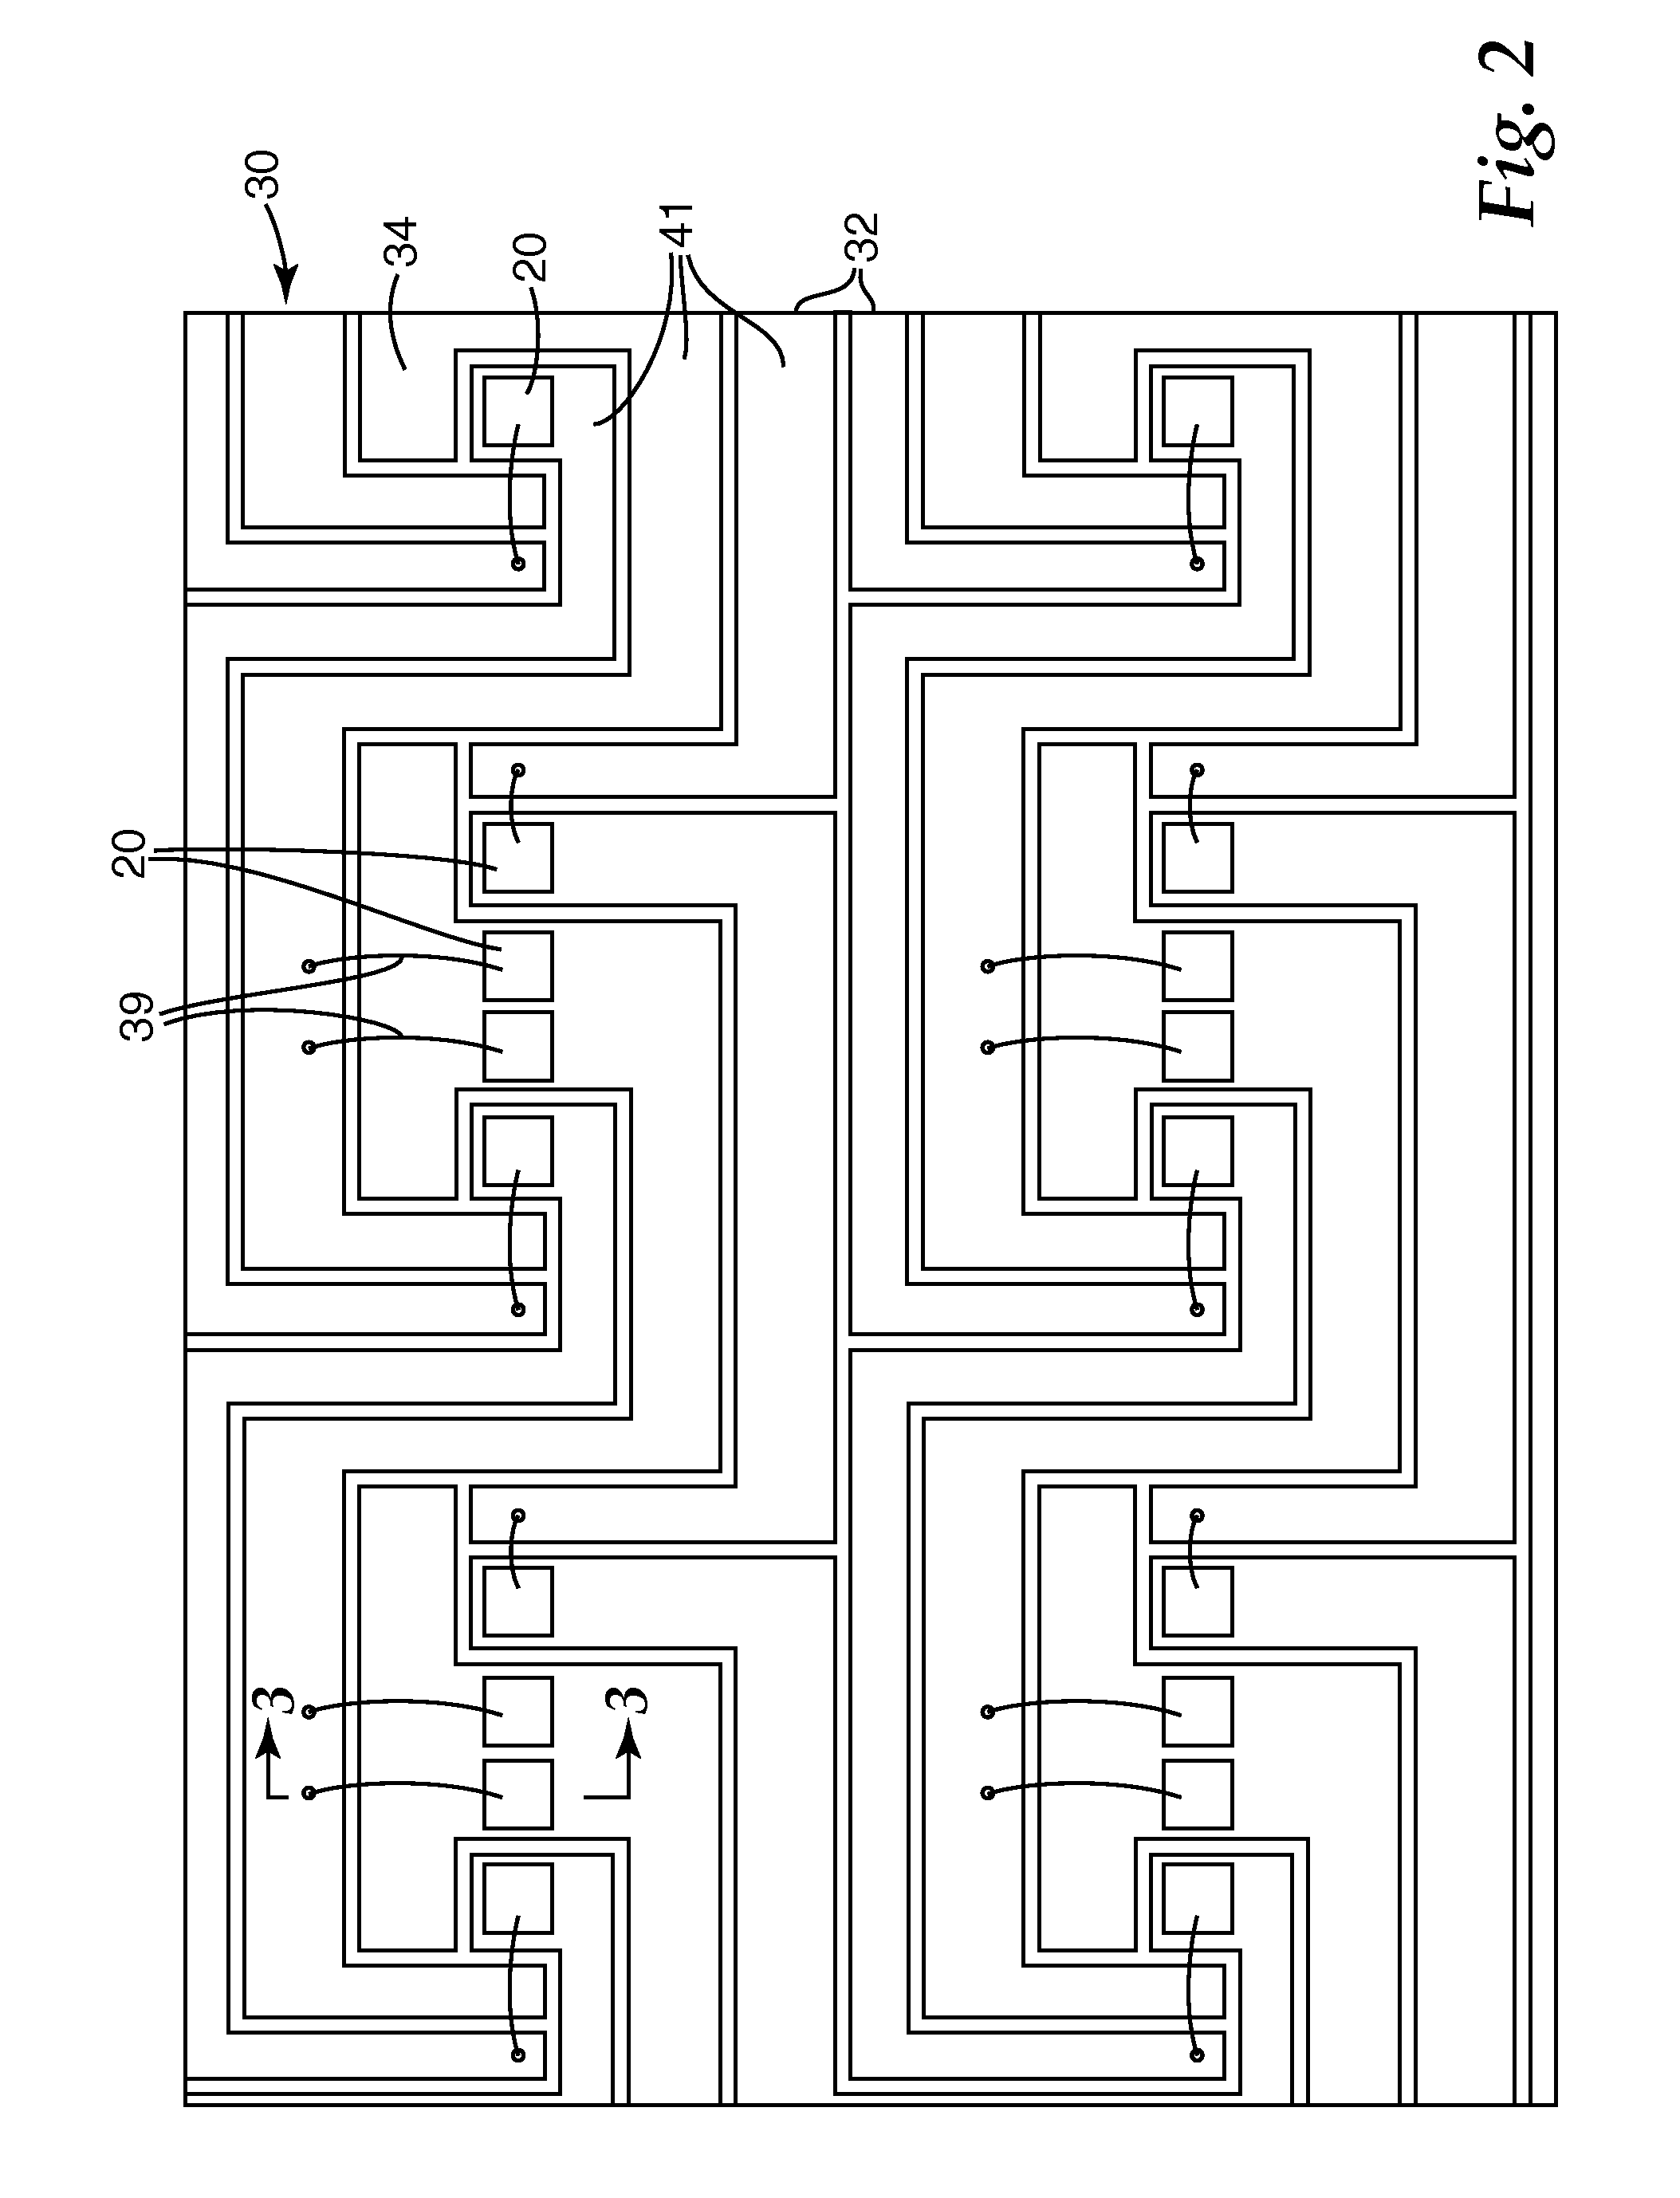 LED illumination assembly with compliant foil construction